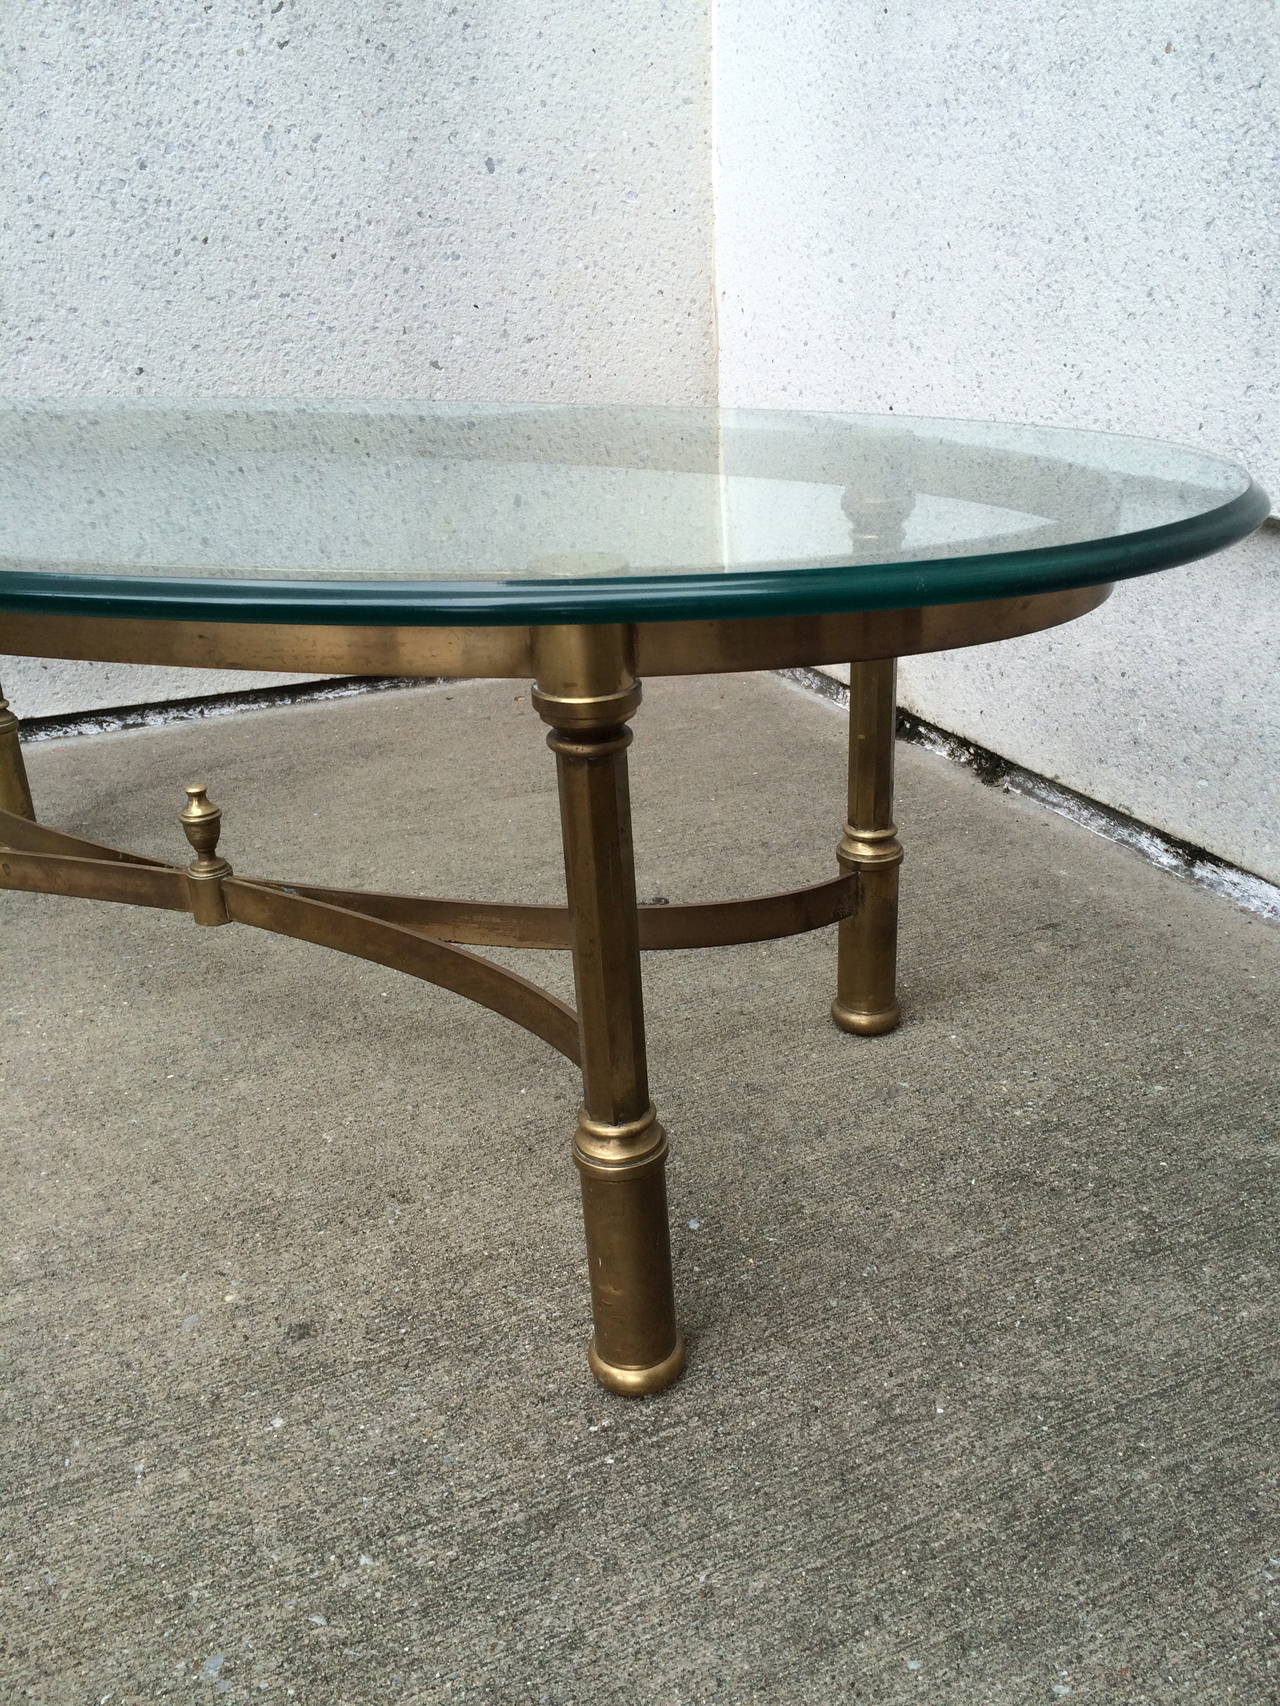 20th Century Neoclassical Brass and Glass Coffee Table